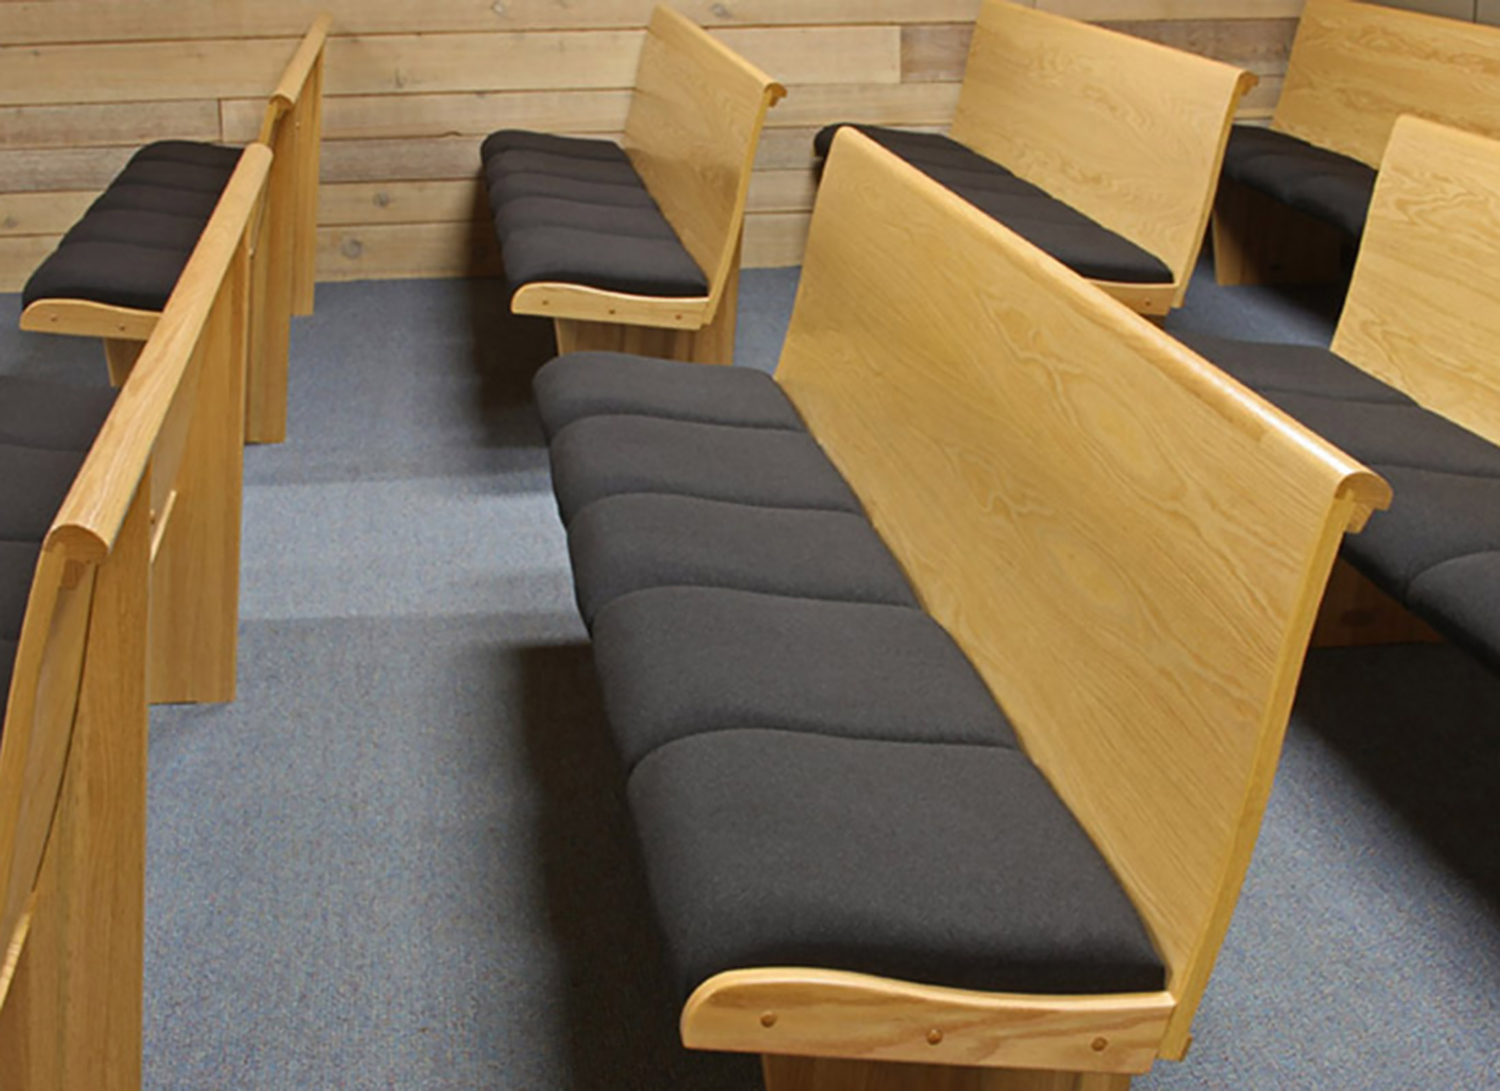 Upholstered Definity Seat and Wood Back Benches in Clear Creek Combined Courts - Georgetown, CO